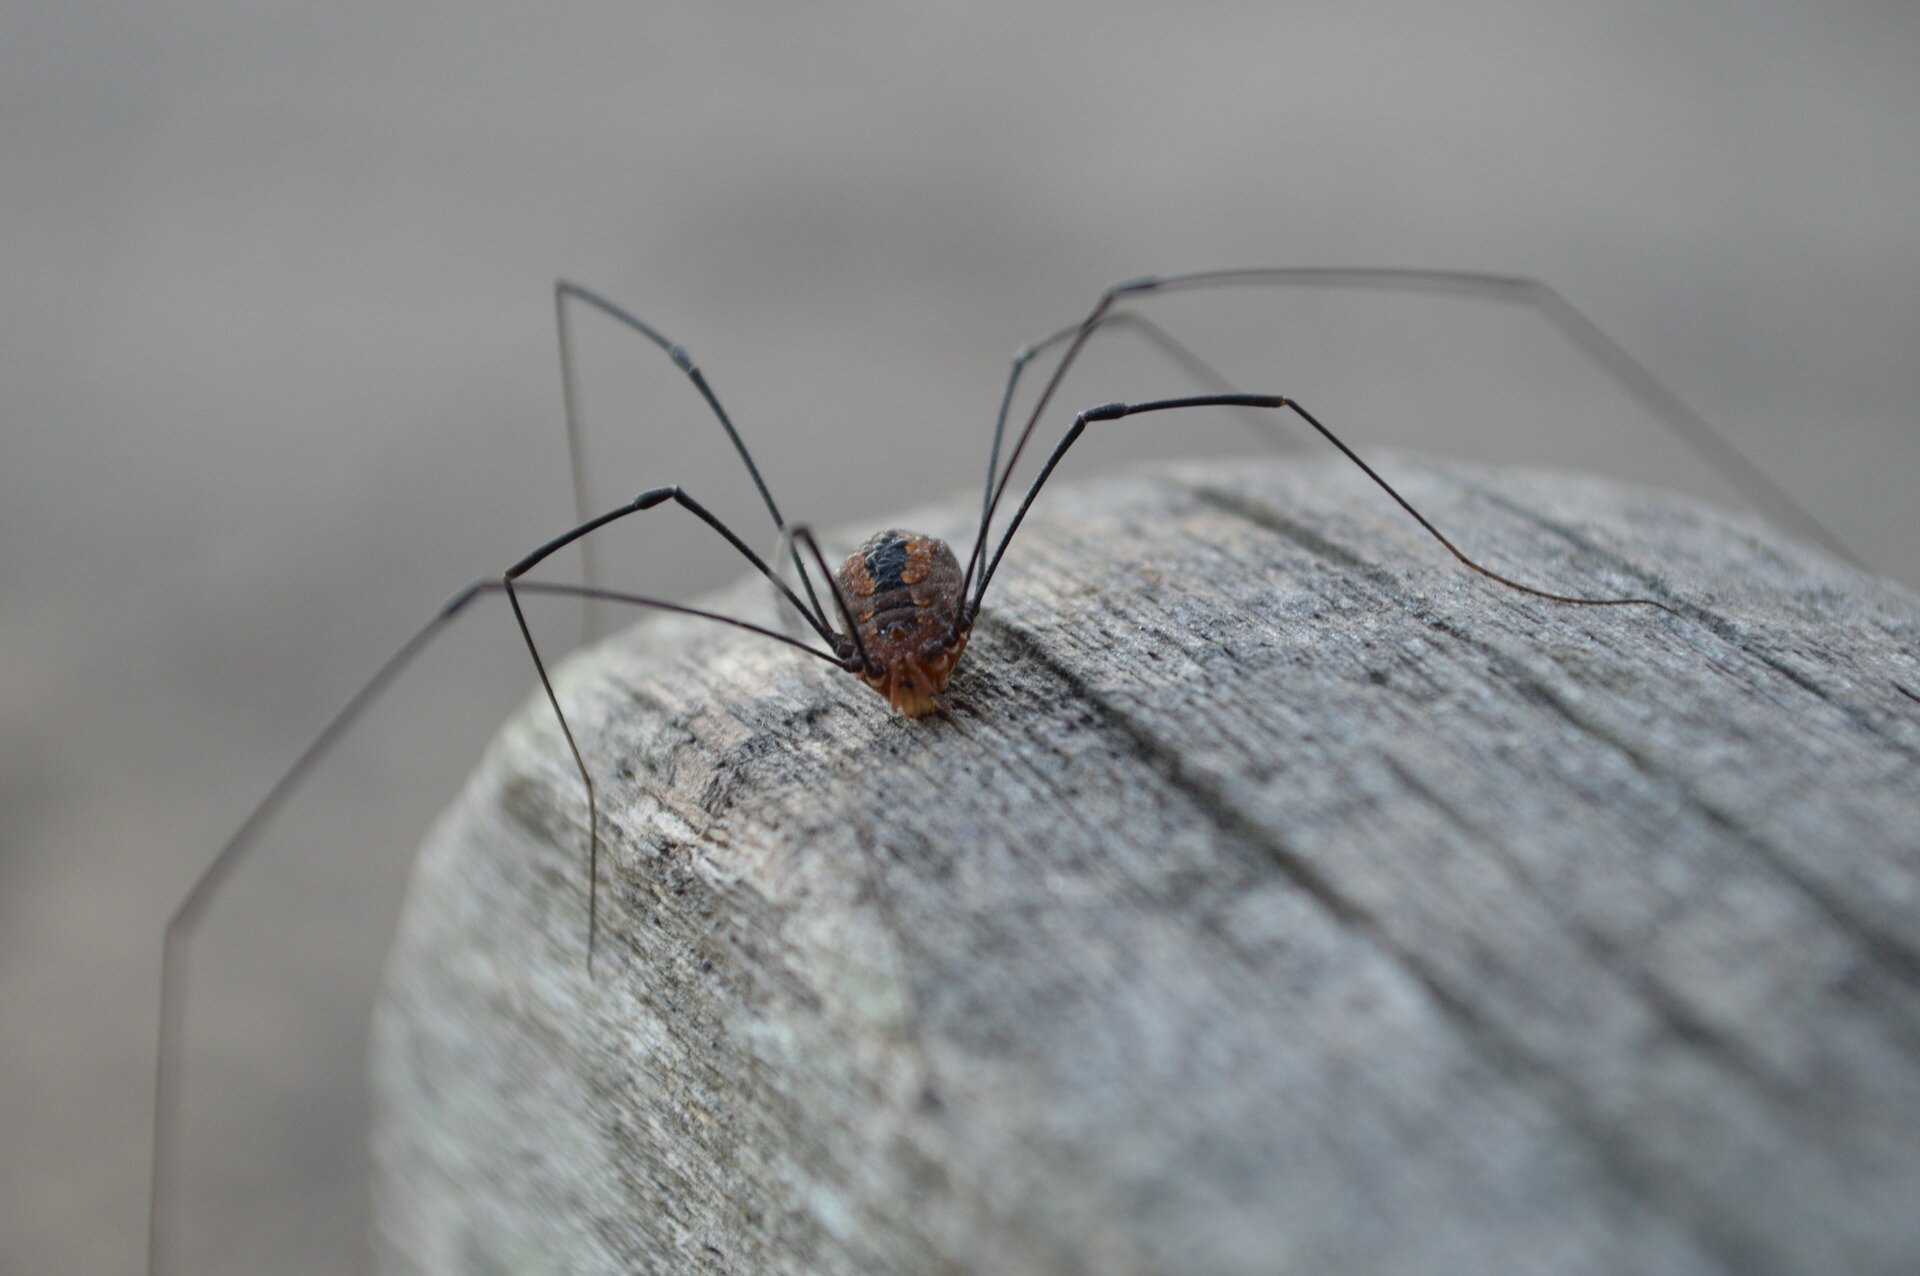 Genetically altered daddy longlegs have short legs